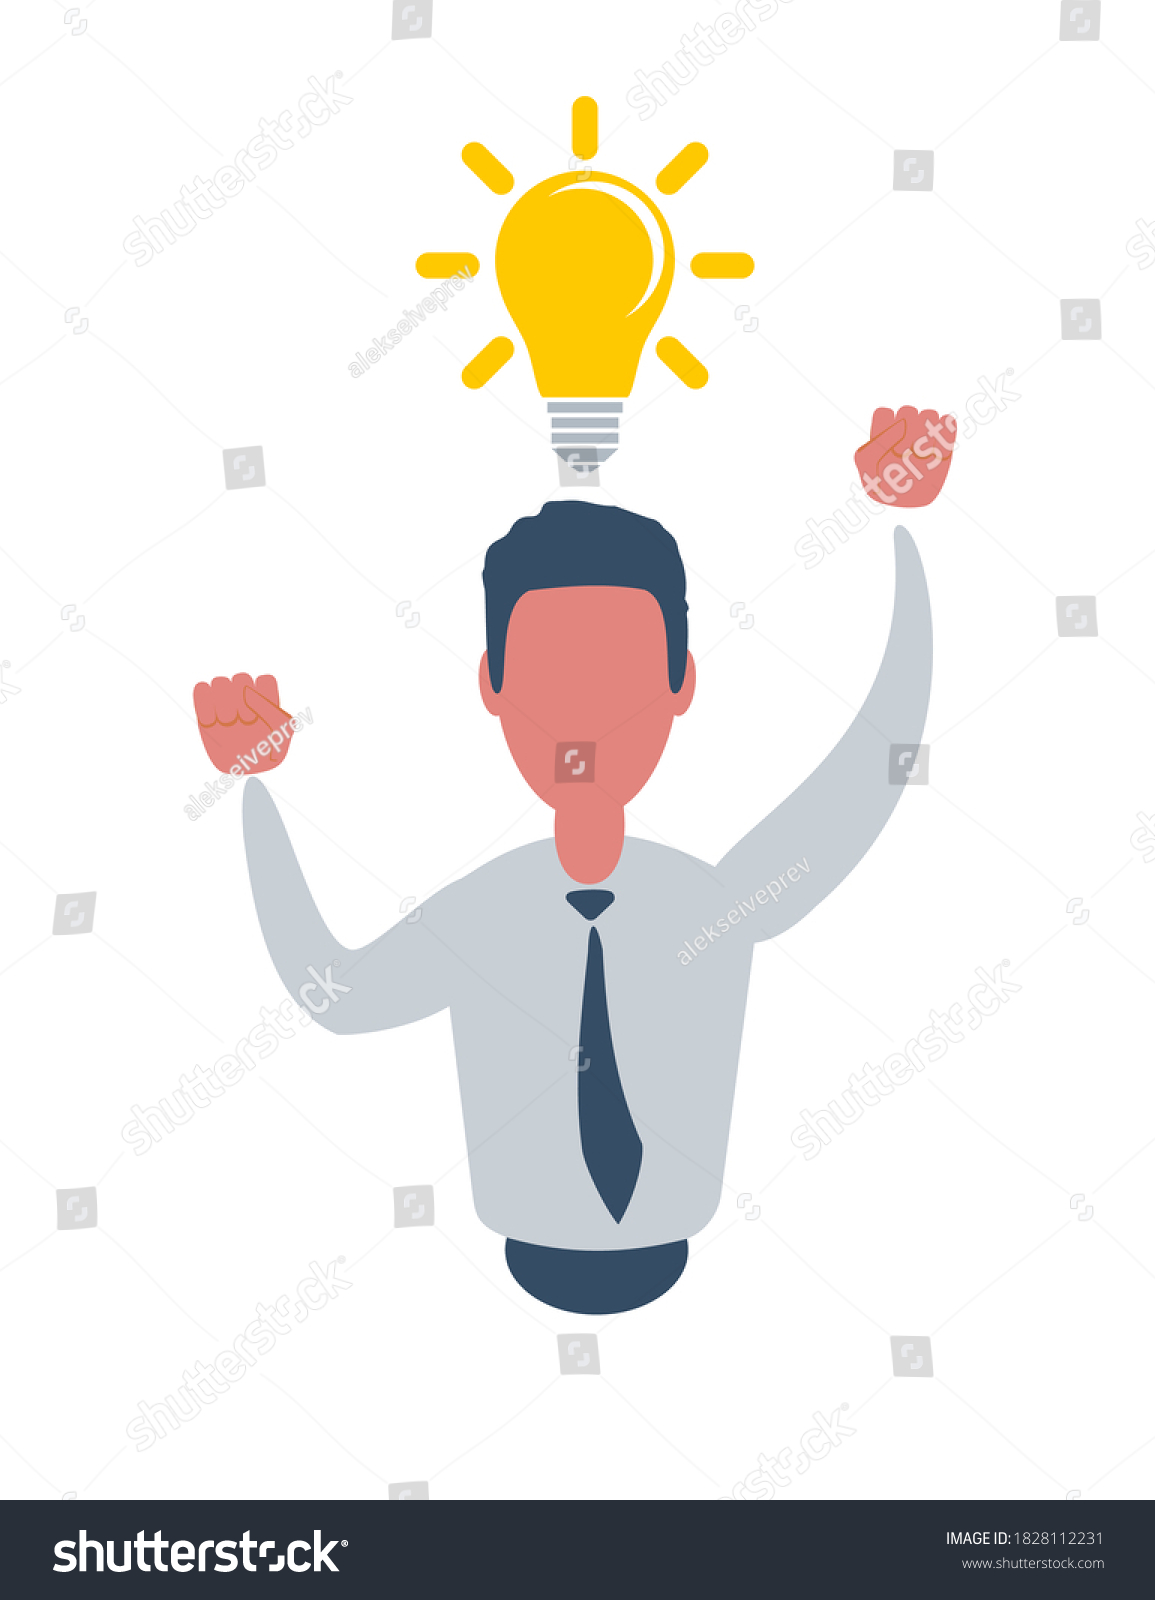 SVG of Man and Yellow Lamp overhead. Idea Generation. Creating Business Idea. New Technologies. Vector Illustration. Reward for New Idea. svg